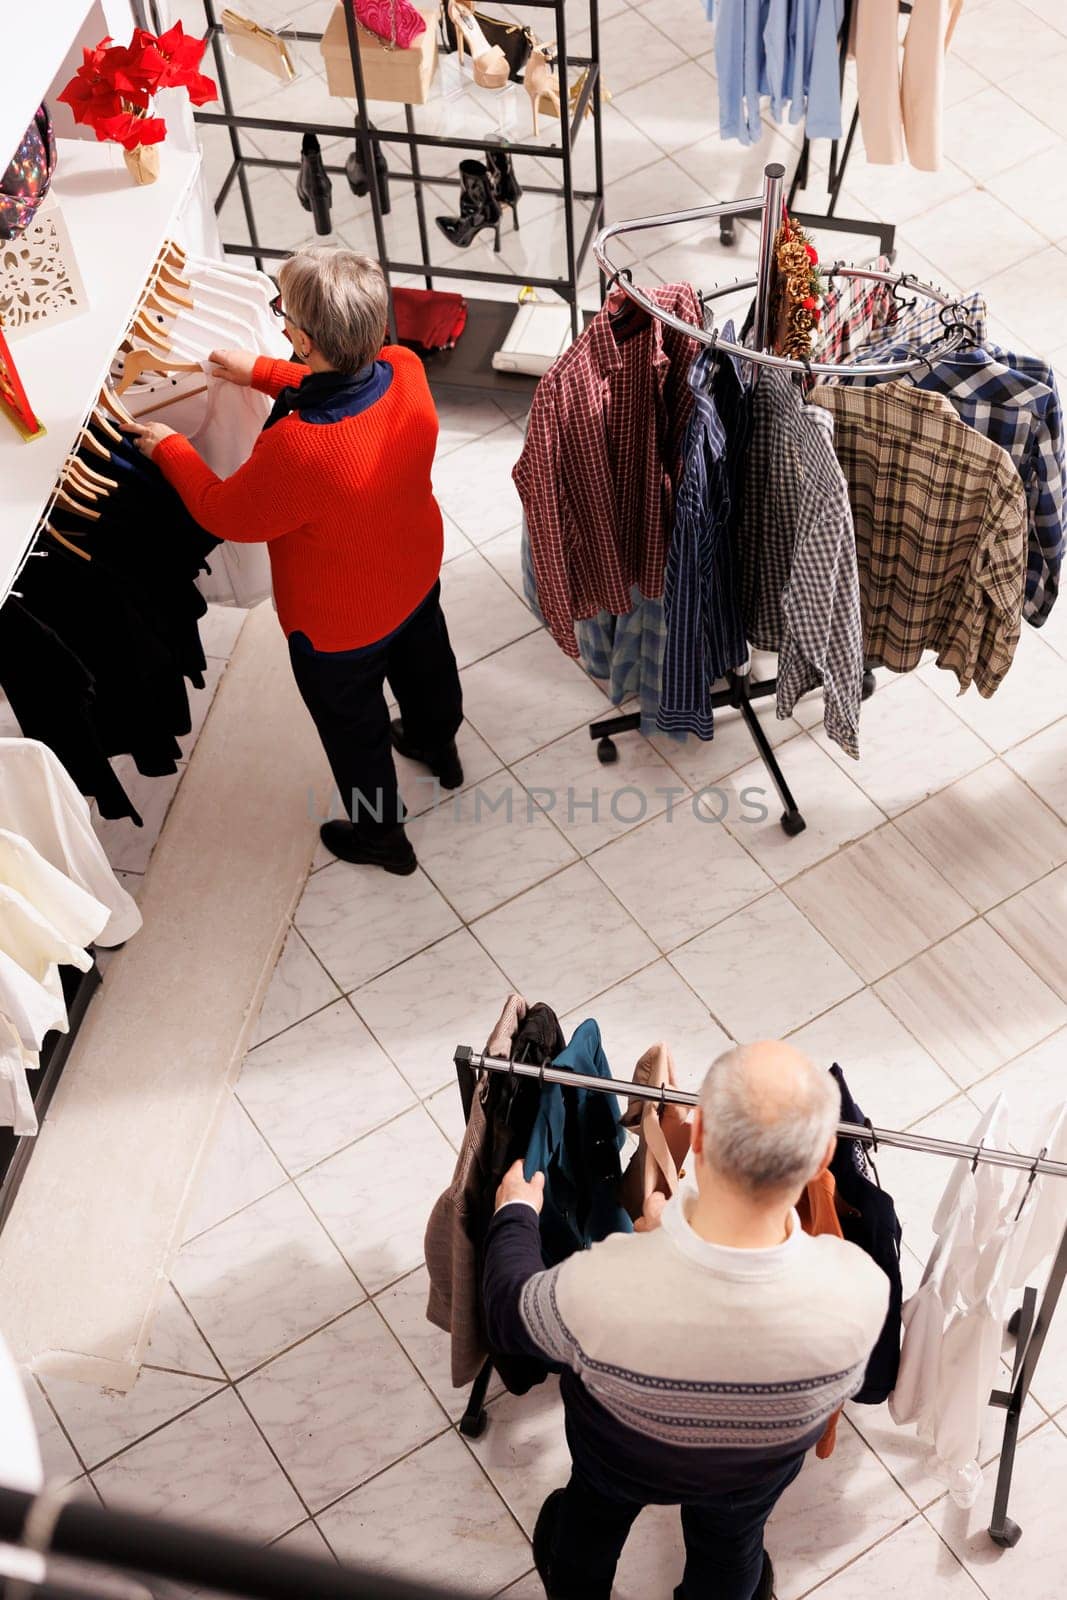 Senior people browsing for clothes by DCStudio